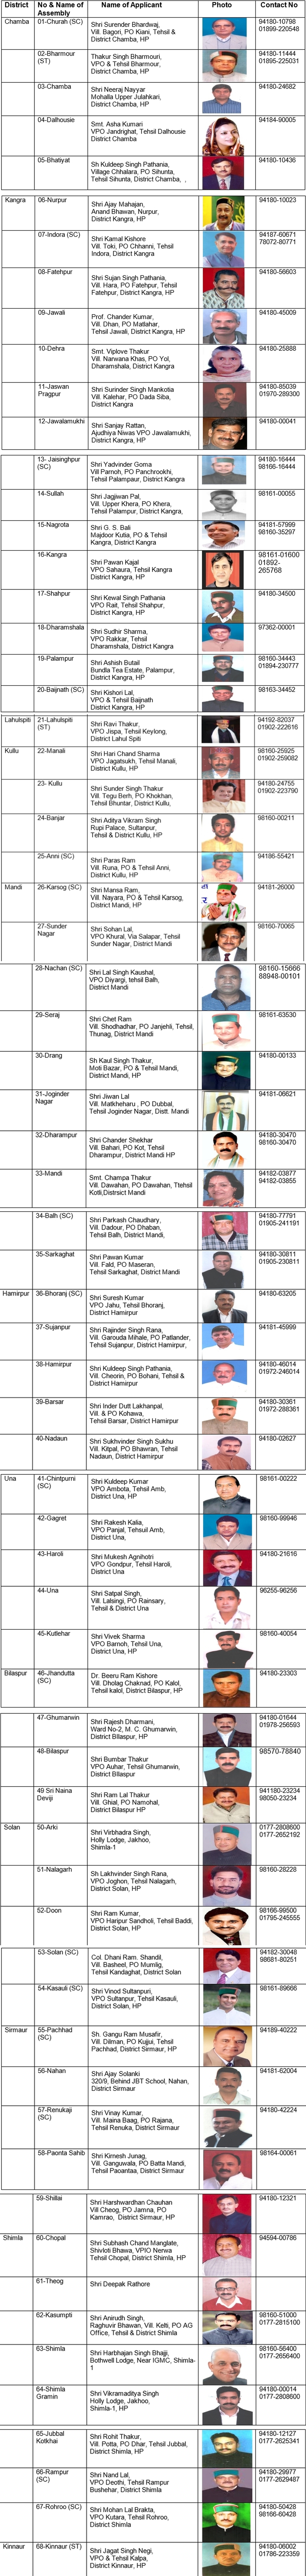 Final himachal congress candidate list for hp assembly polls 2017